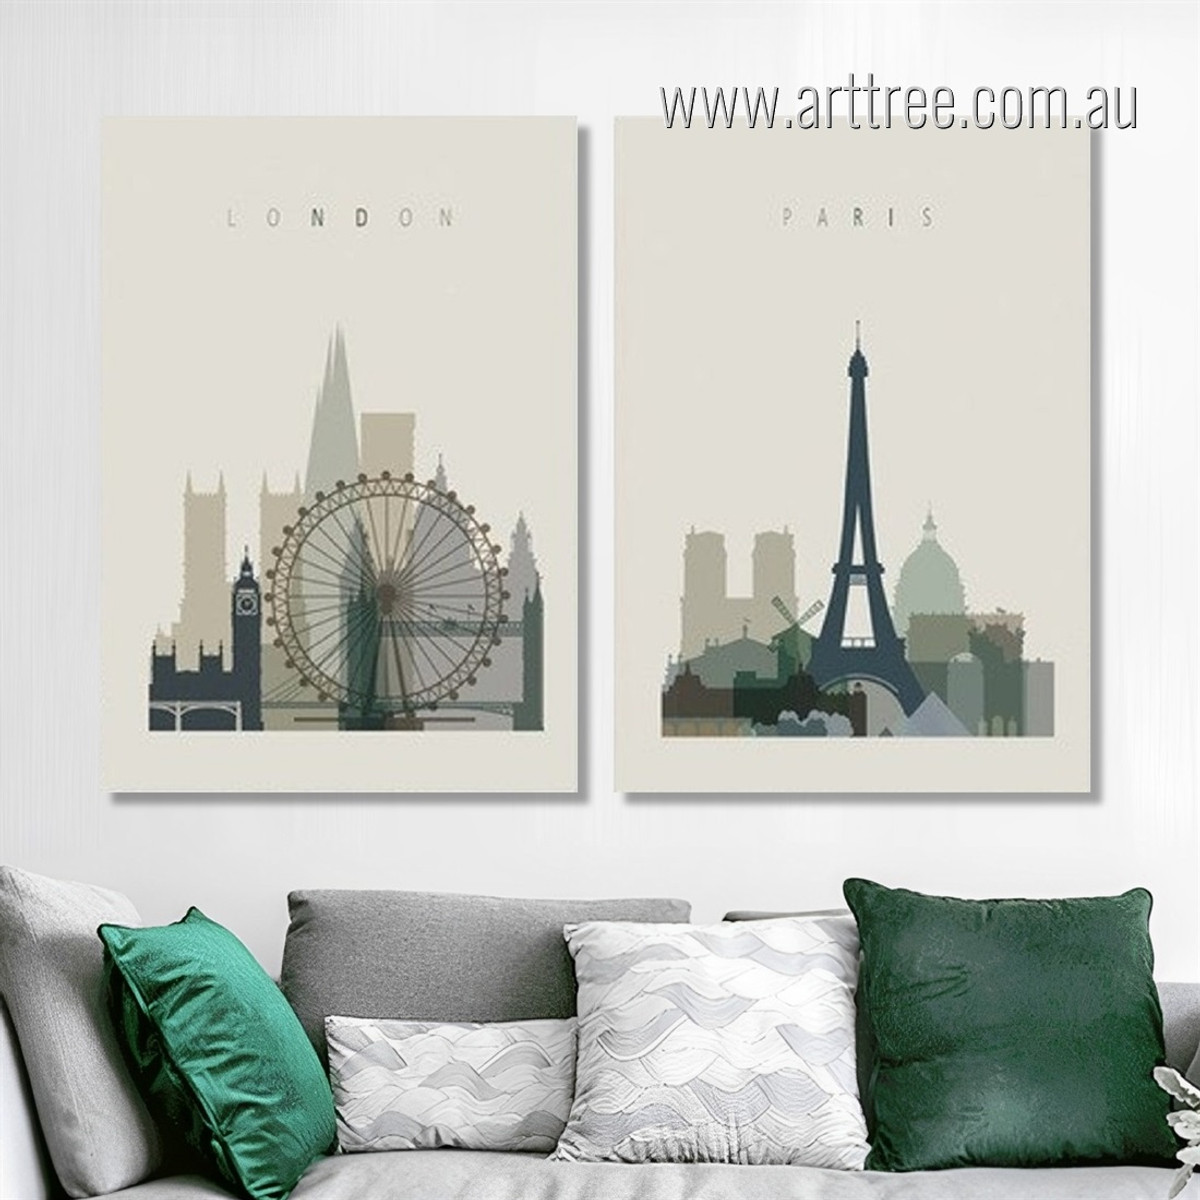 Paris London Cityscape Painting Photo Stretched Framed 2 Piece Abstract Wall Art Canvas Prints For Room Decor